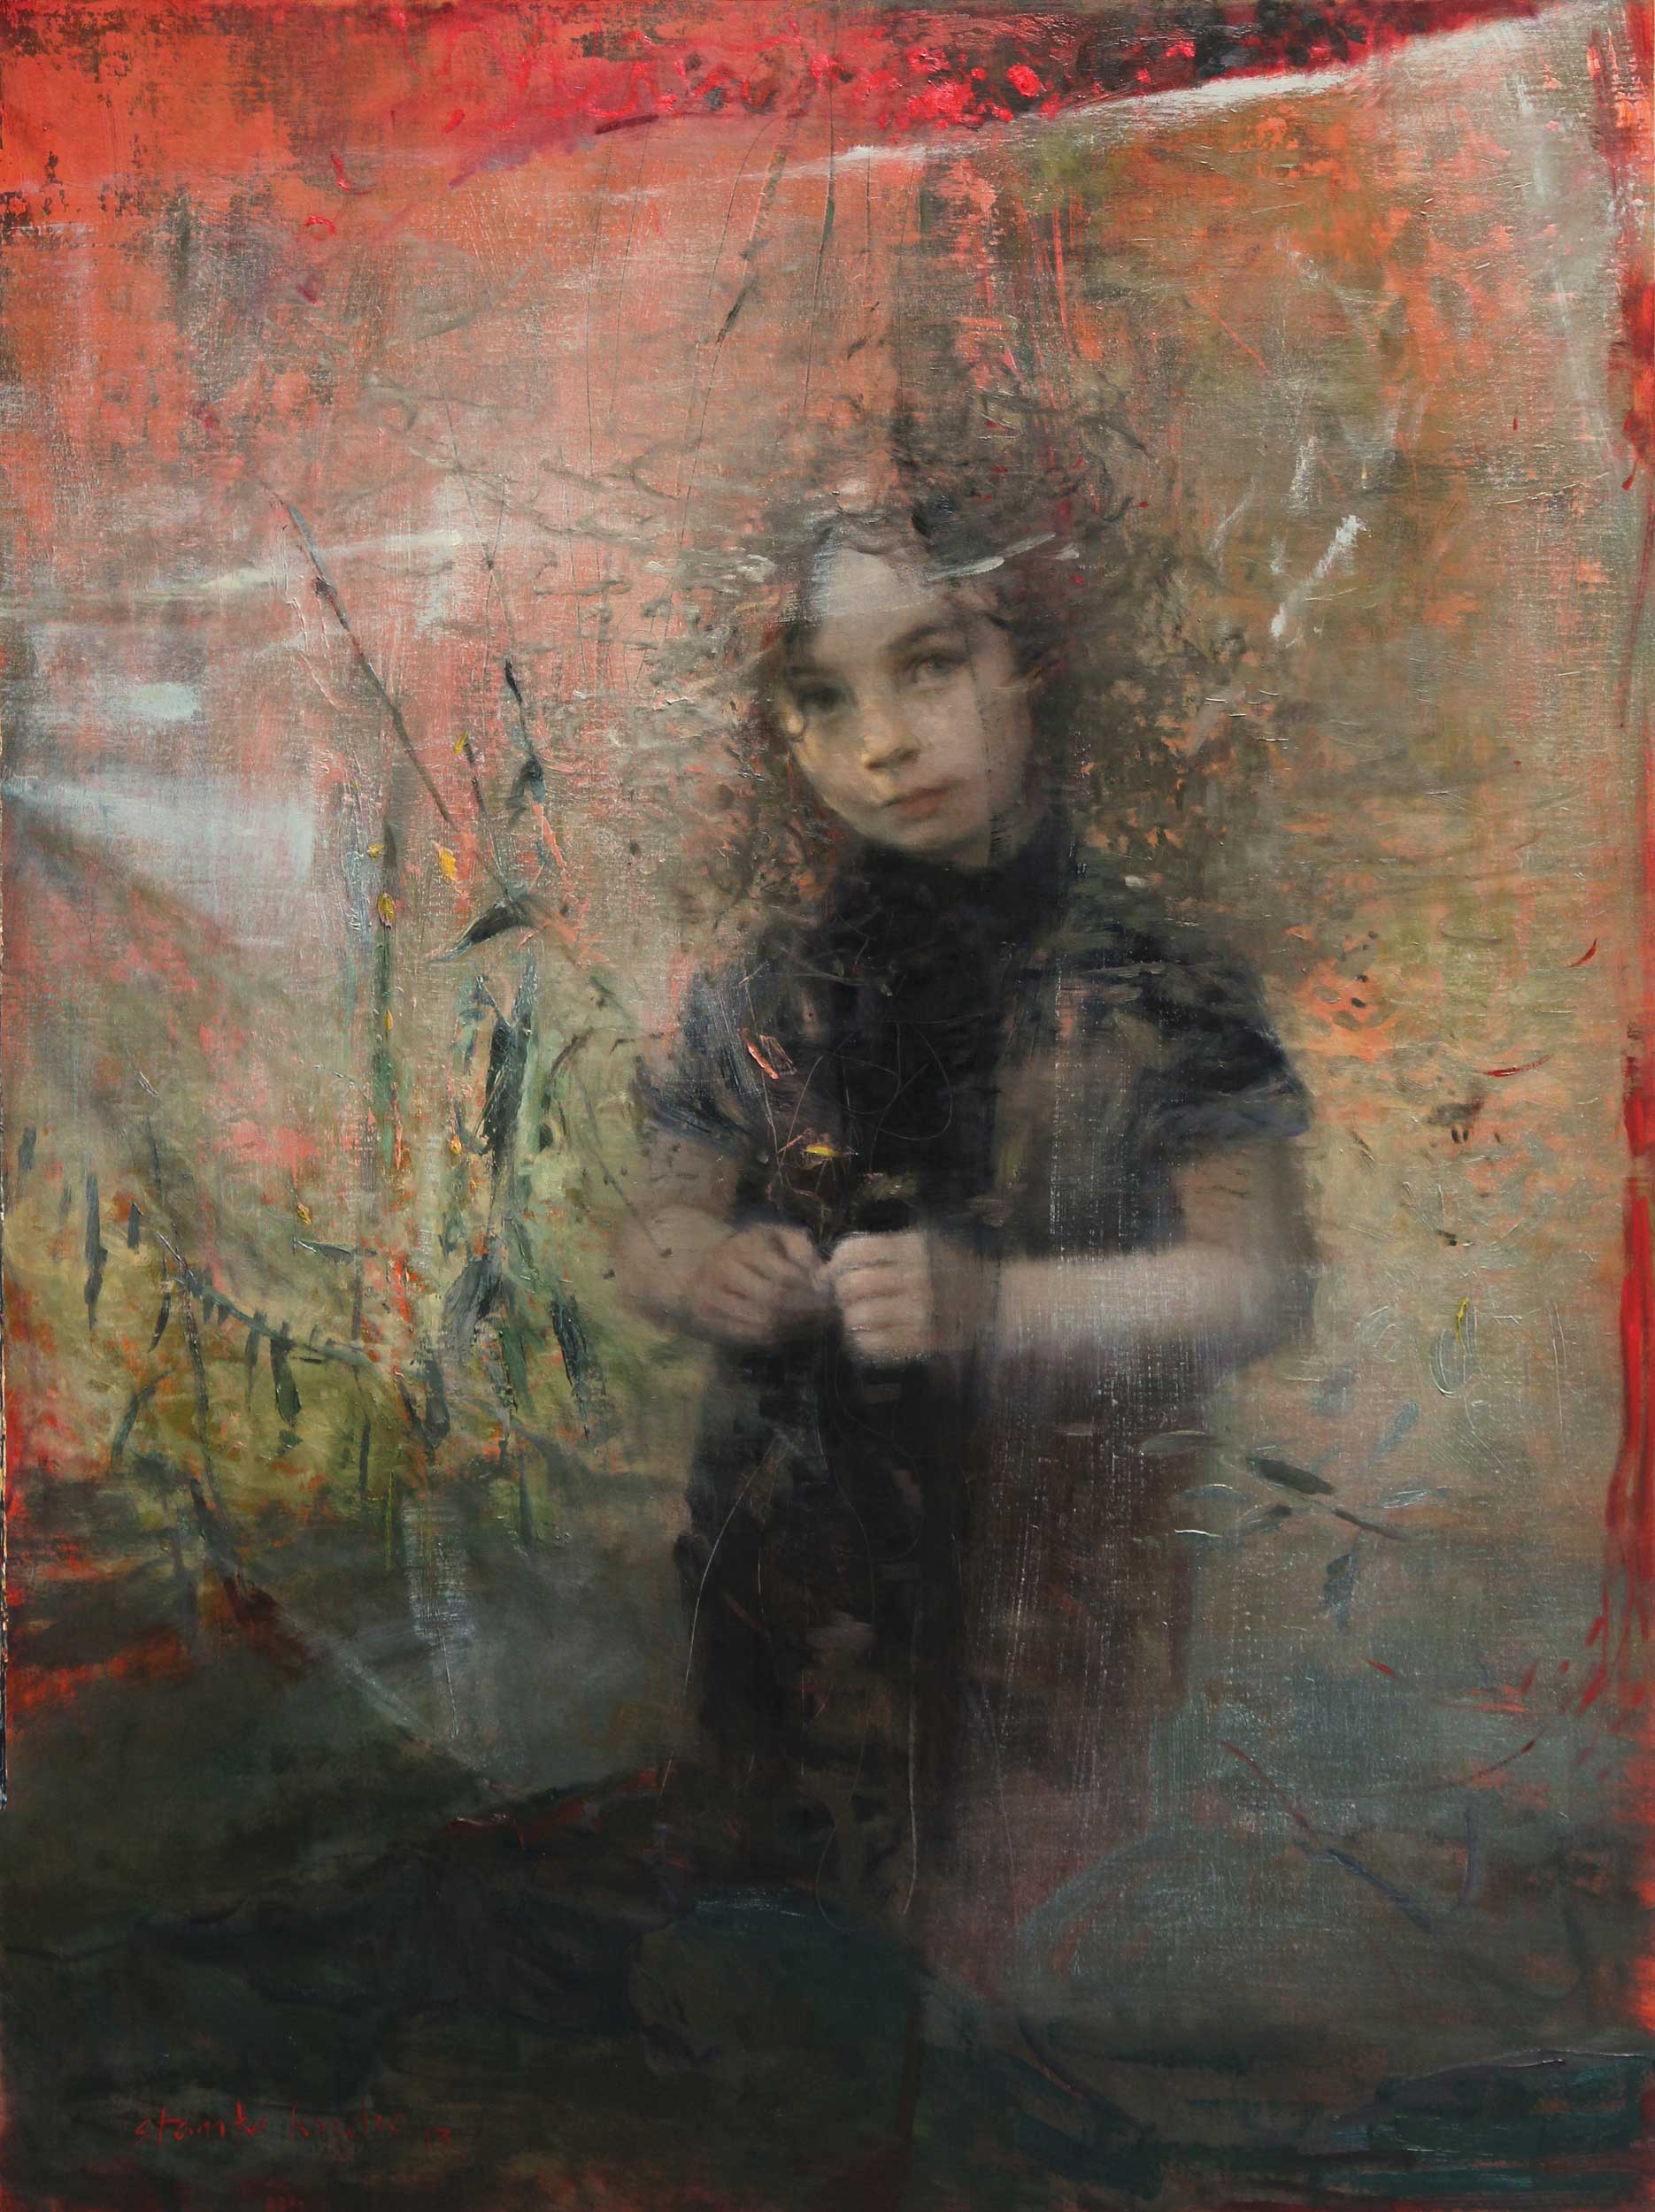 Stanka Kordic, "Beneath the Veil of a Red Sky," 40 x 30 inches, Oil on linen